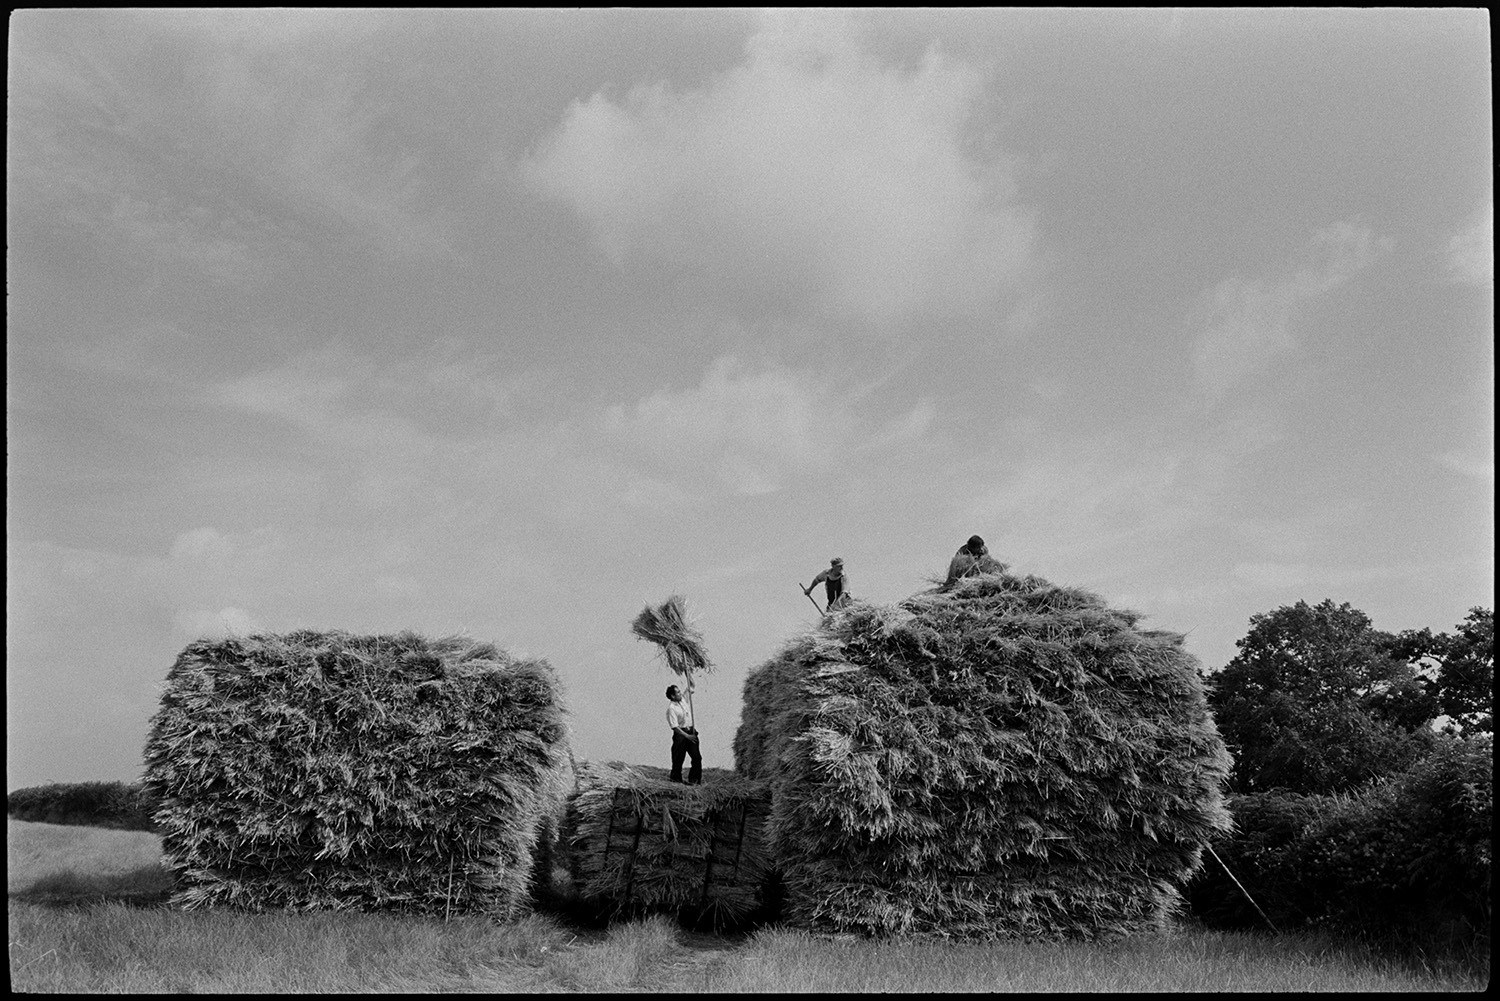 Farmers building wheat rick of thatching reed.
[Farmers building a square wheat rick of thatching reed in a field at Riddlecombe. A man is lofting the reed off a trailer using a pitchfork and passing it to two other men building the rick.]